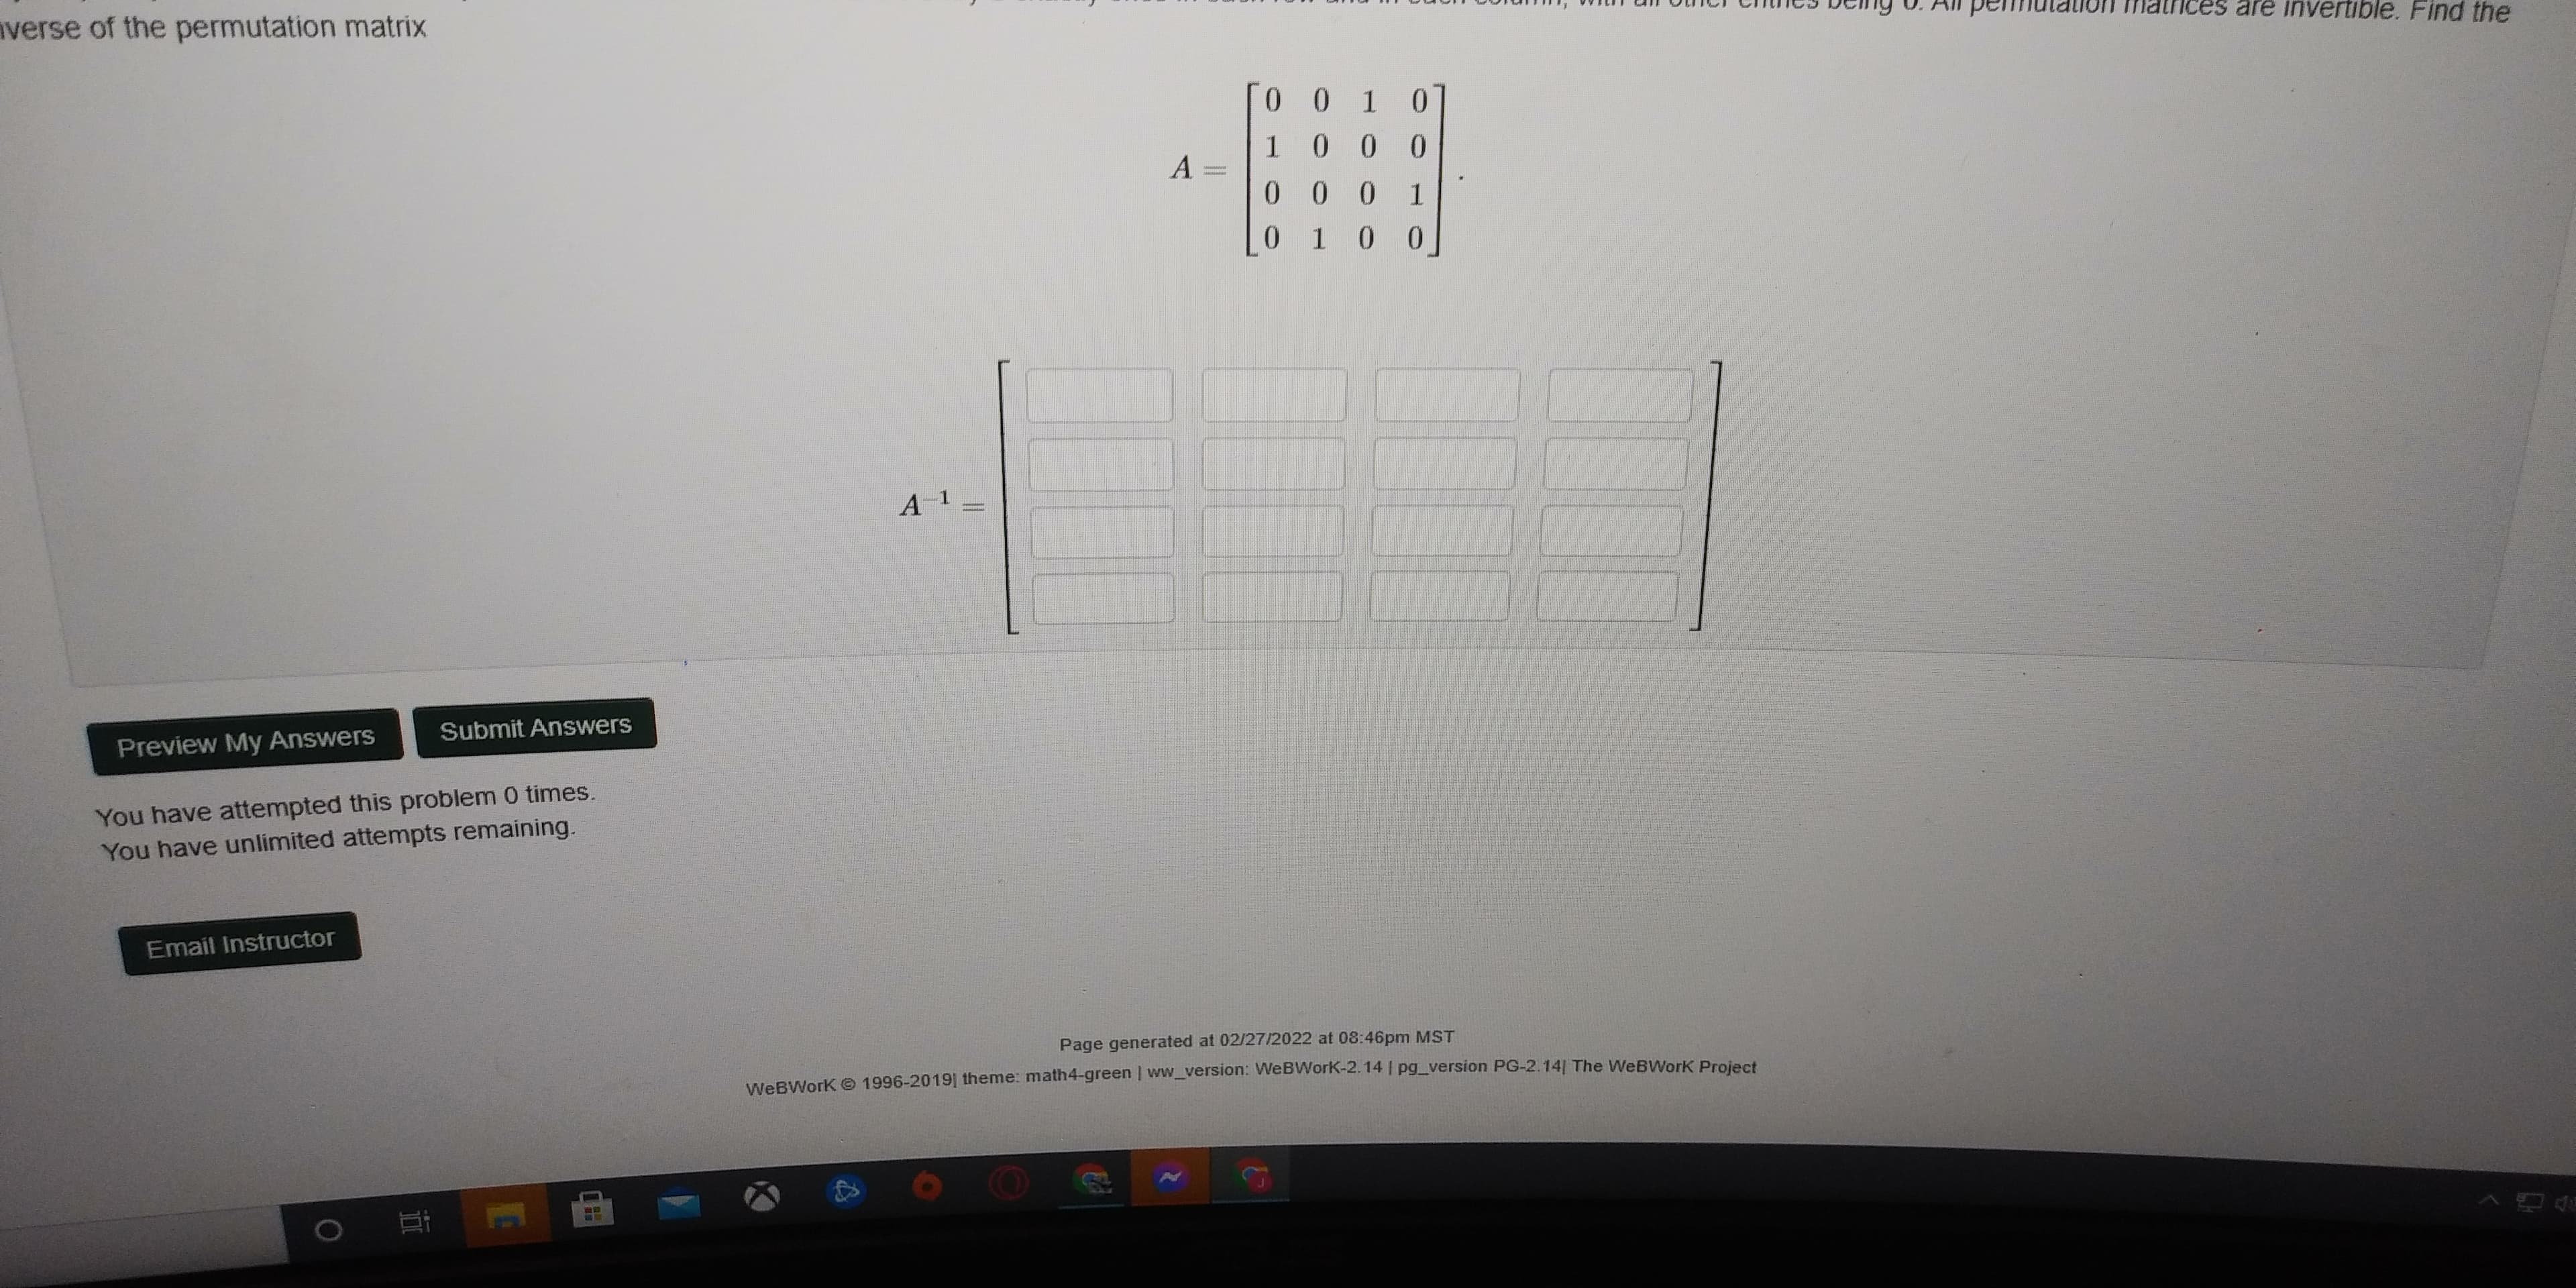 nverse of the permutation matrix
1.
A.
10 0
0.
[o 0 I 0
Preview My Answers
Submit Answers
You have attempted this problem 0 times.
You have unlimited attempts remaining.
Email Instructor
Page generated at 02/27/2022 at 08:46pm MST
WeBWork O 1996-2019] theme: math4-green | ww_version: WeBWorK-2.14 | pg_version PG-2.14| The WeBWork Project
近
